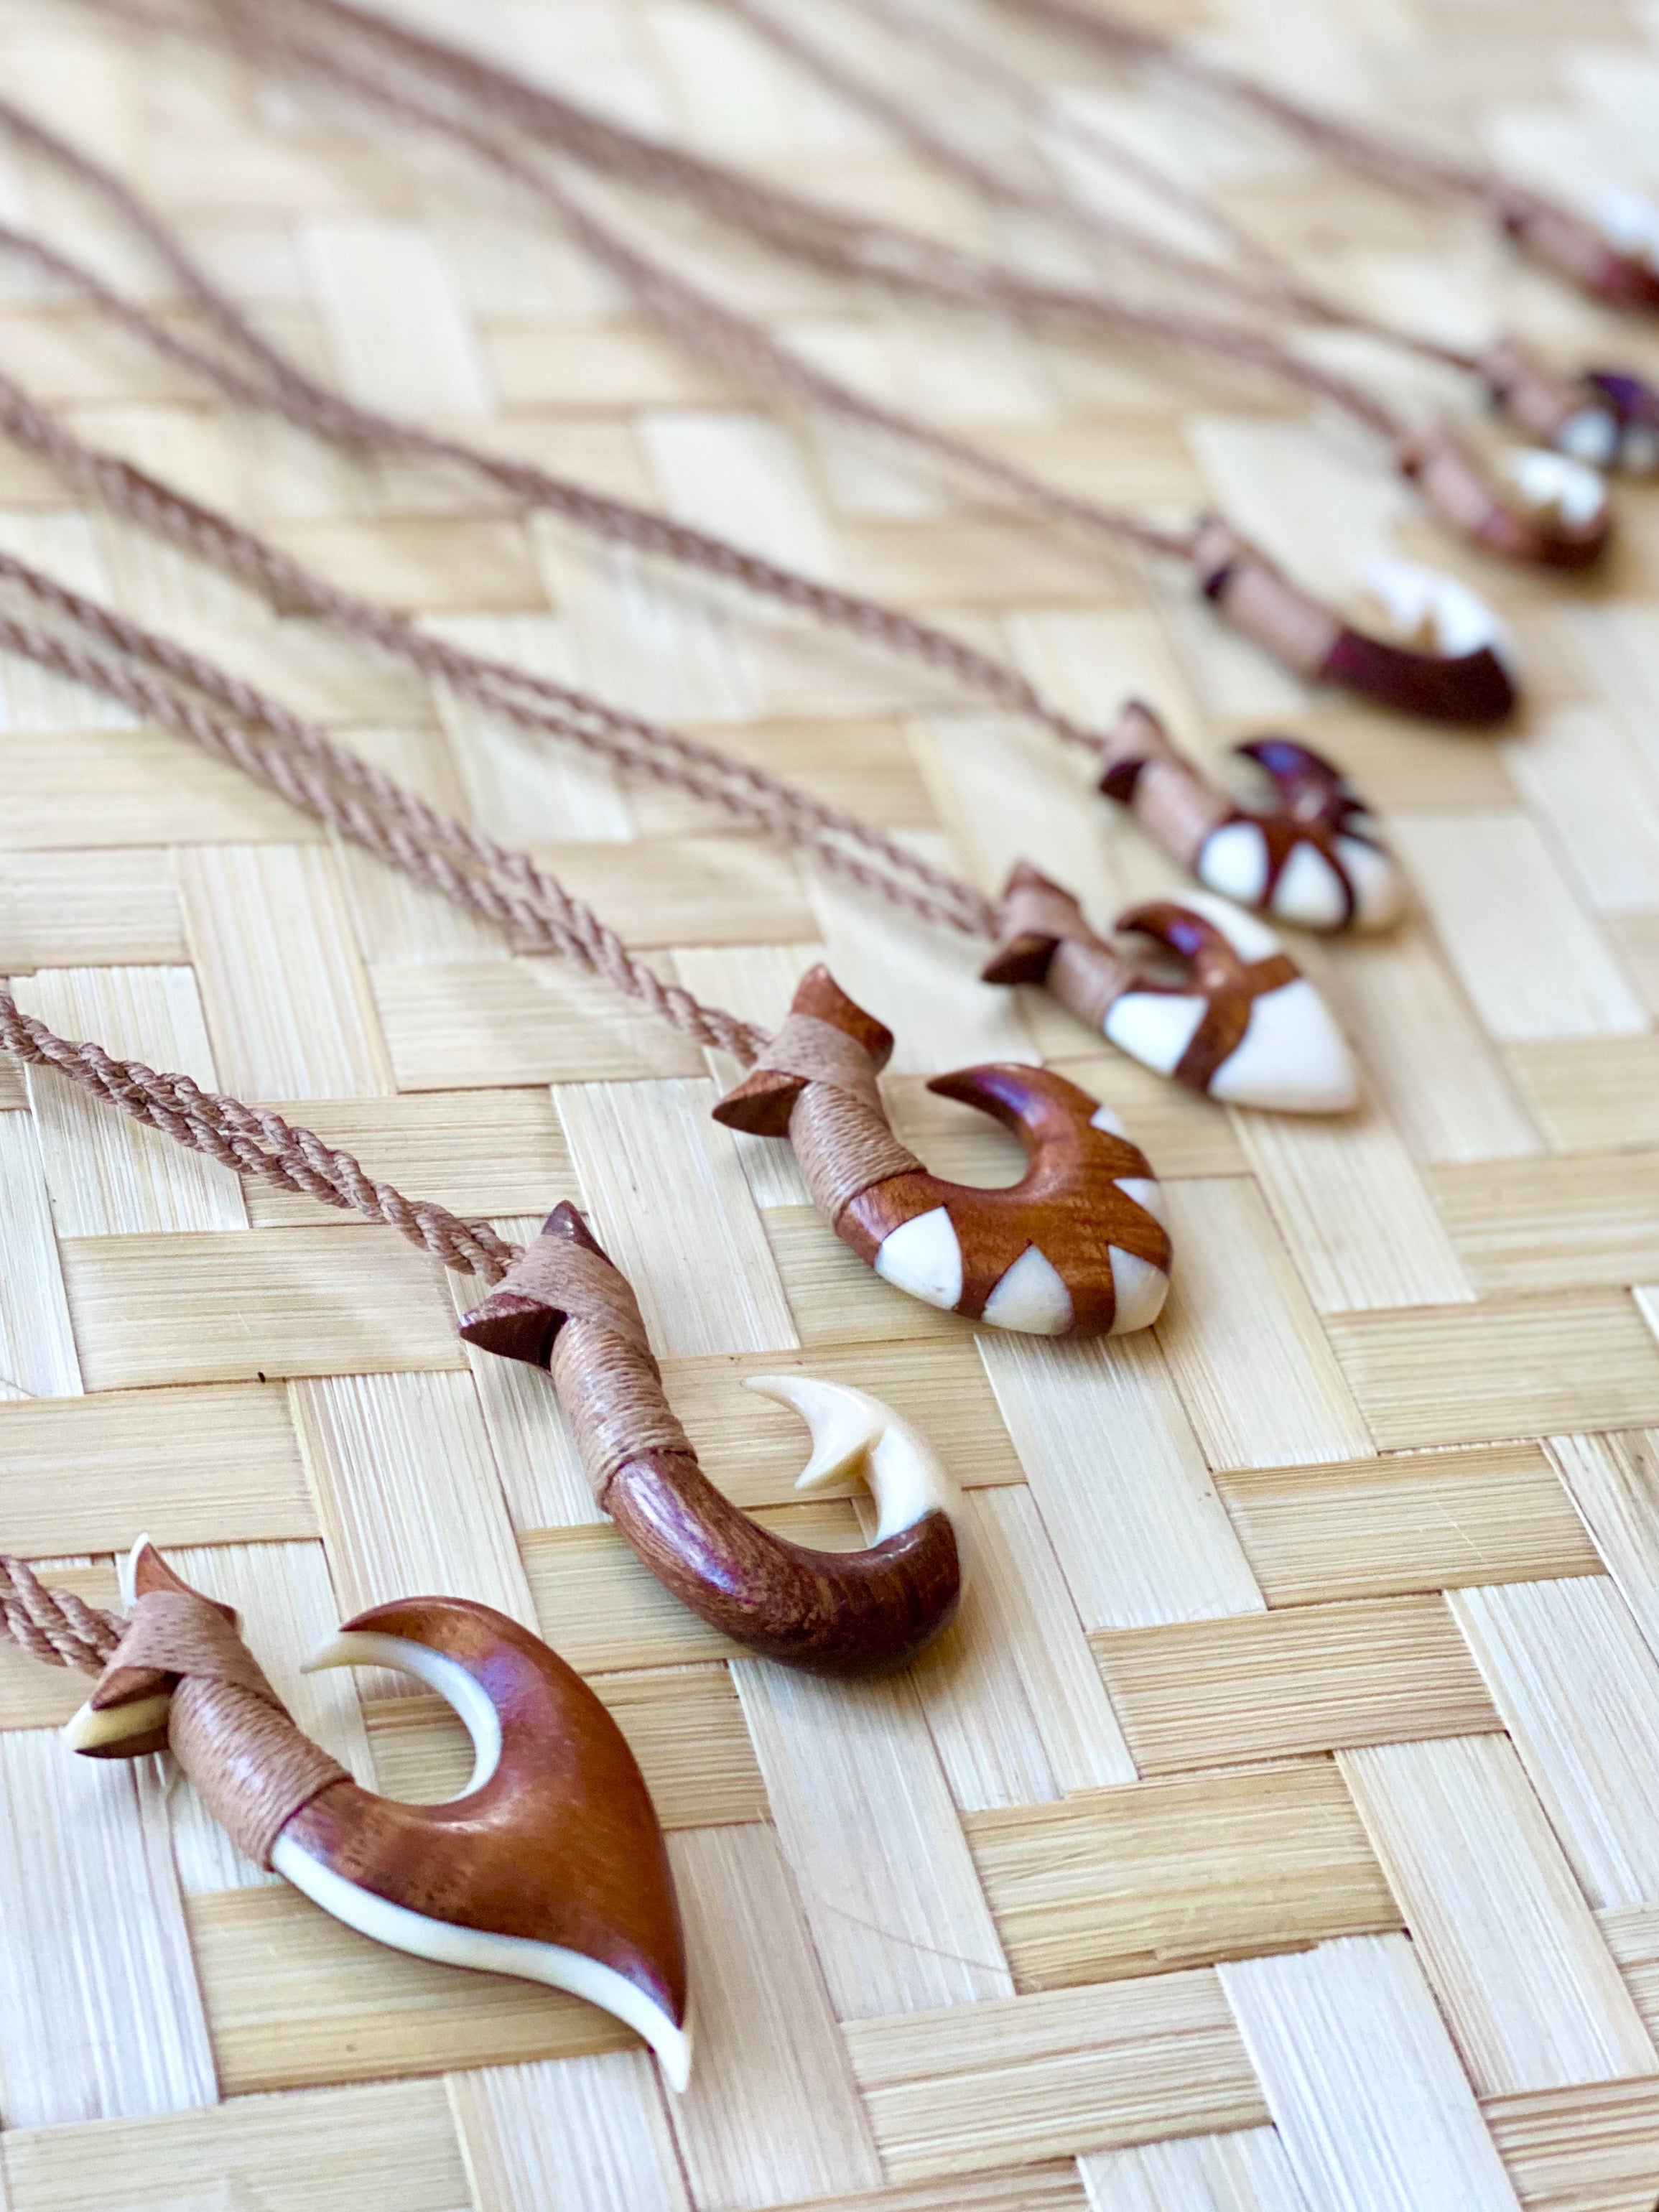 Wooden Carved Fish Necklace hand carved Ironwood Fish pendant